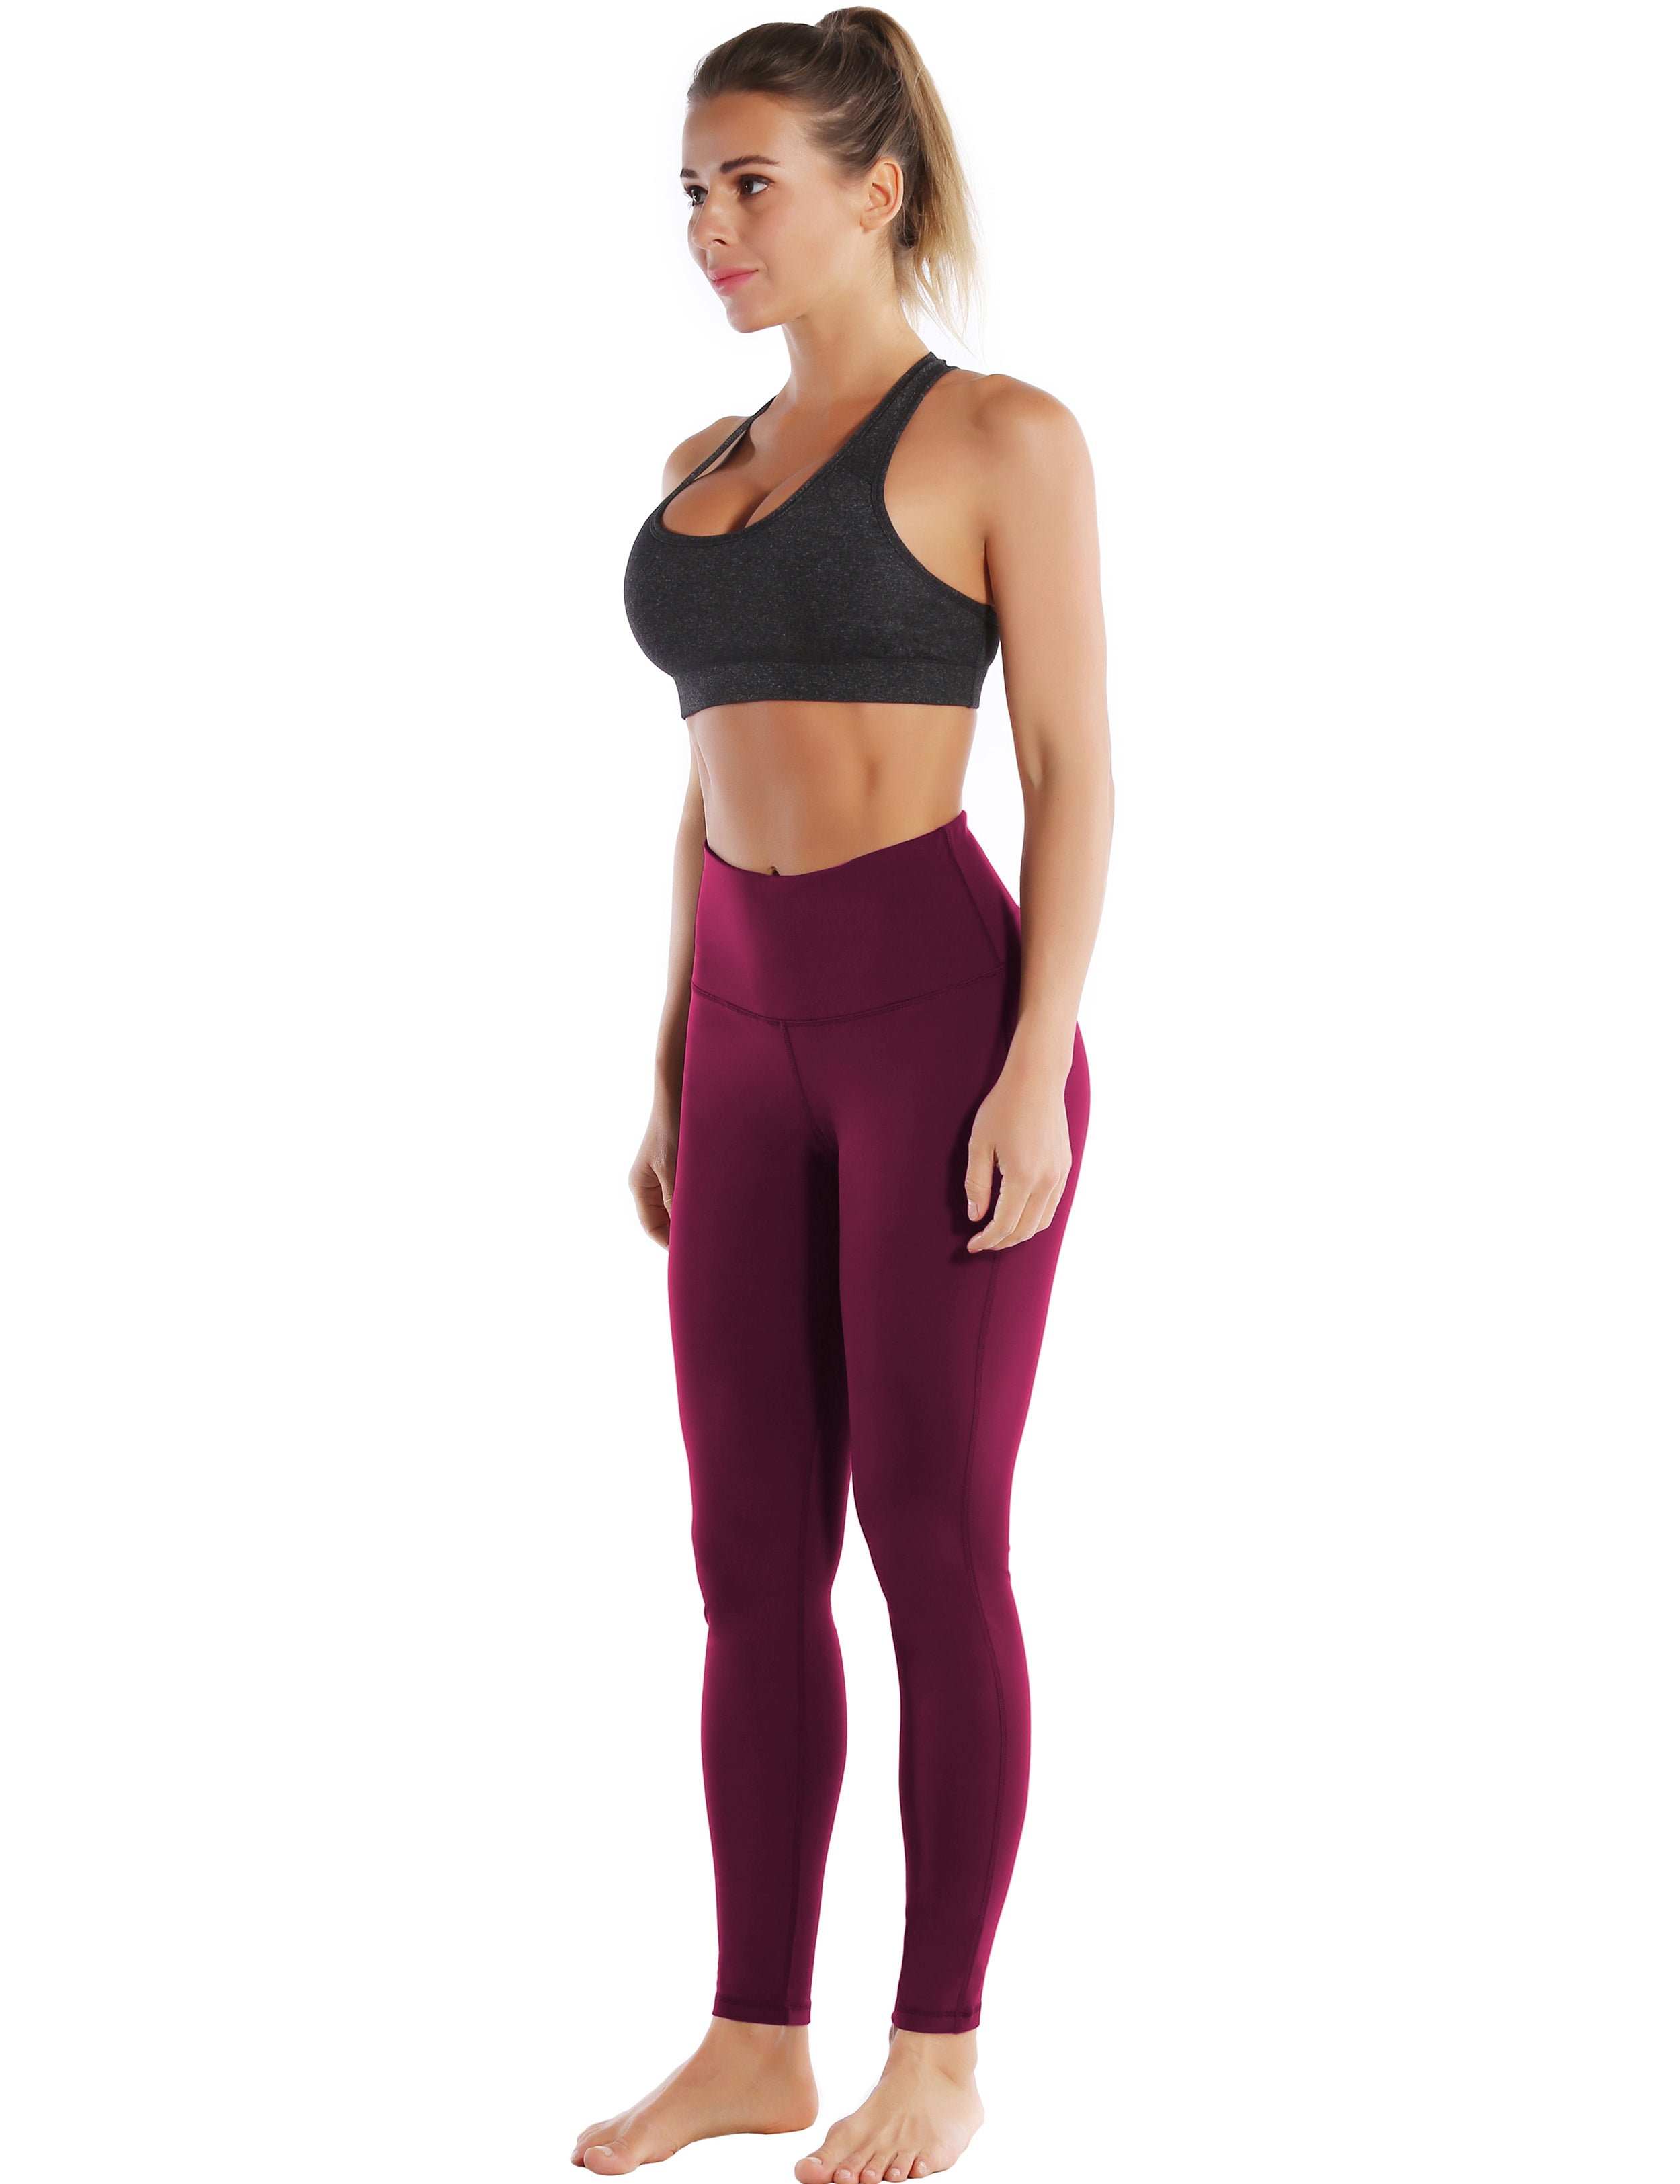 High Waist Side Line Yoga Pants grapevine Side Line is Make Your Legs Look Longer and Thinner 75%Nylon/25%Spandex Fabric doesn't attract lint easily 4-way stretch No see-through Moisture-wicking Tummy control Inner pocket Two lengths